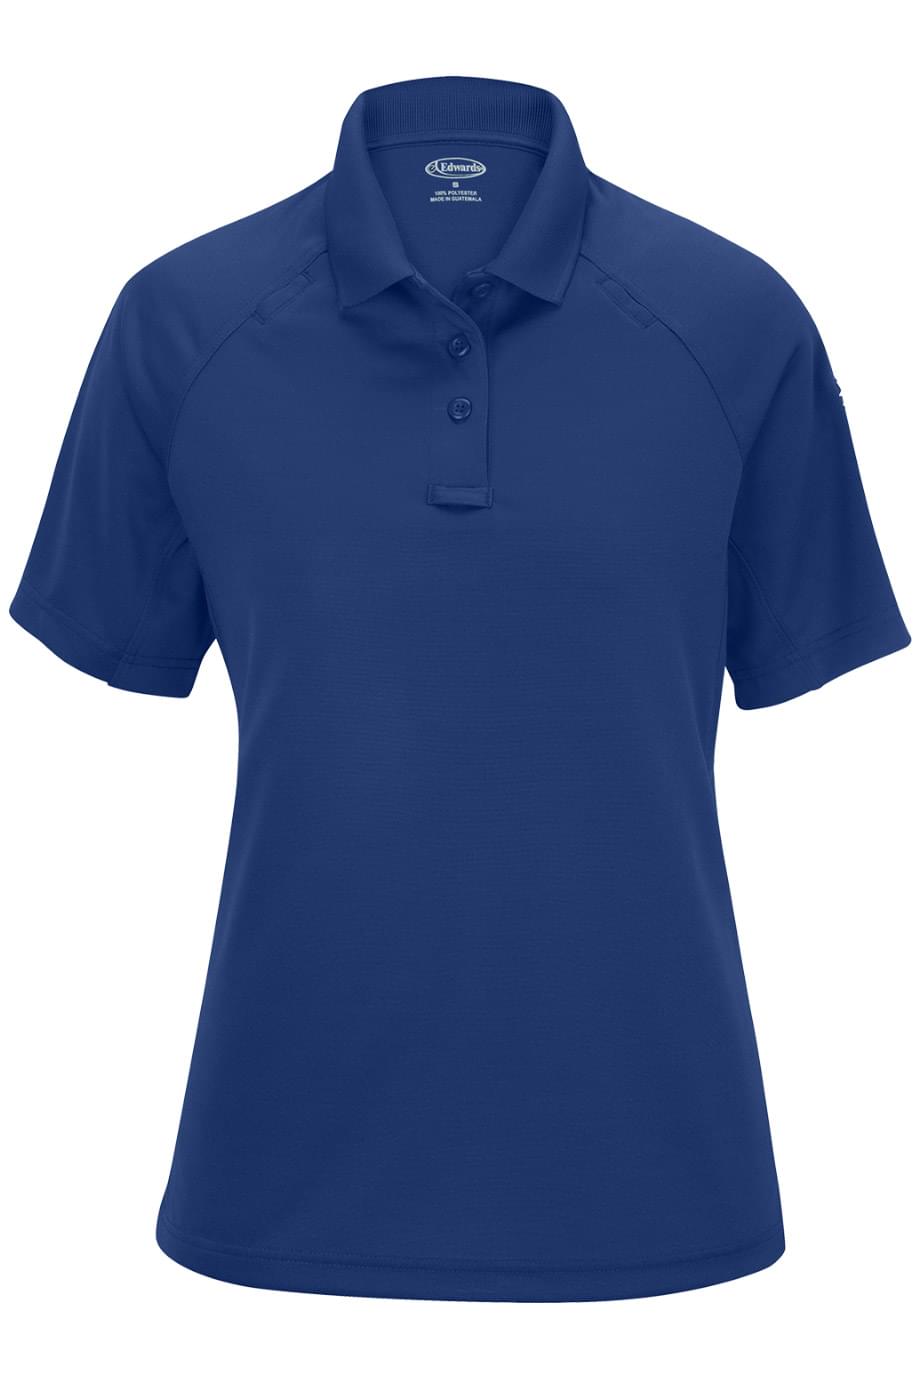 Edwards Snag-Proof Polo 5512 for Women Royal